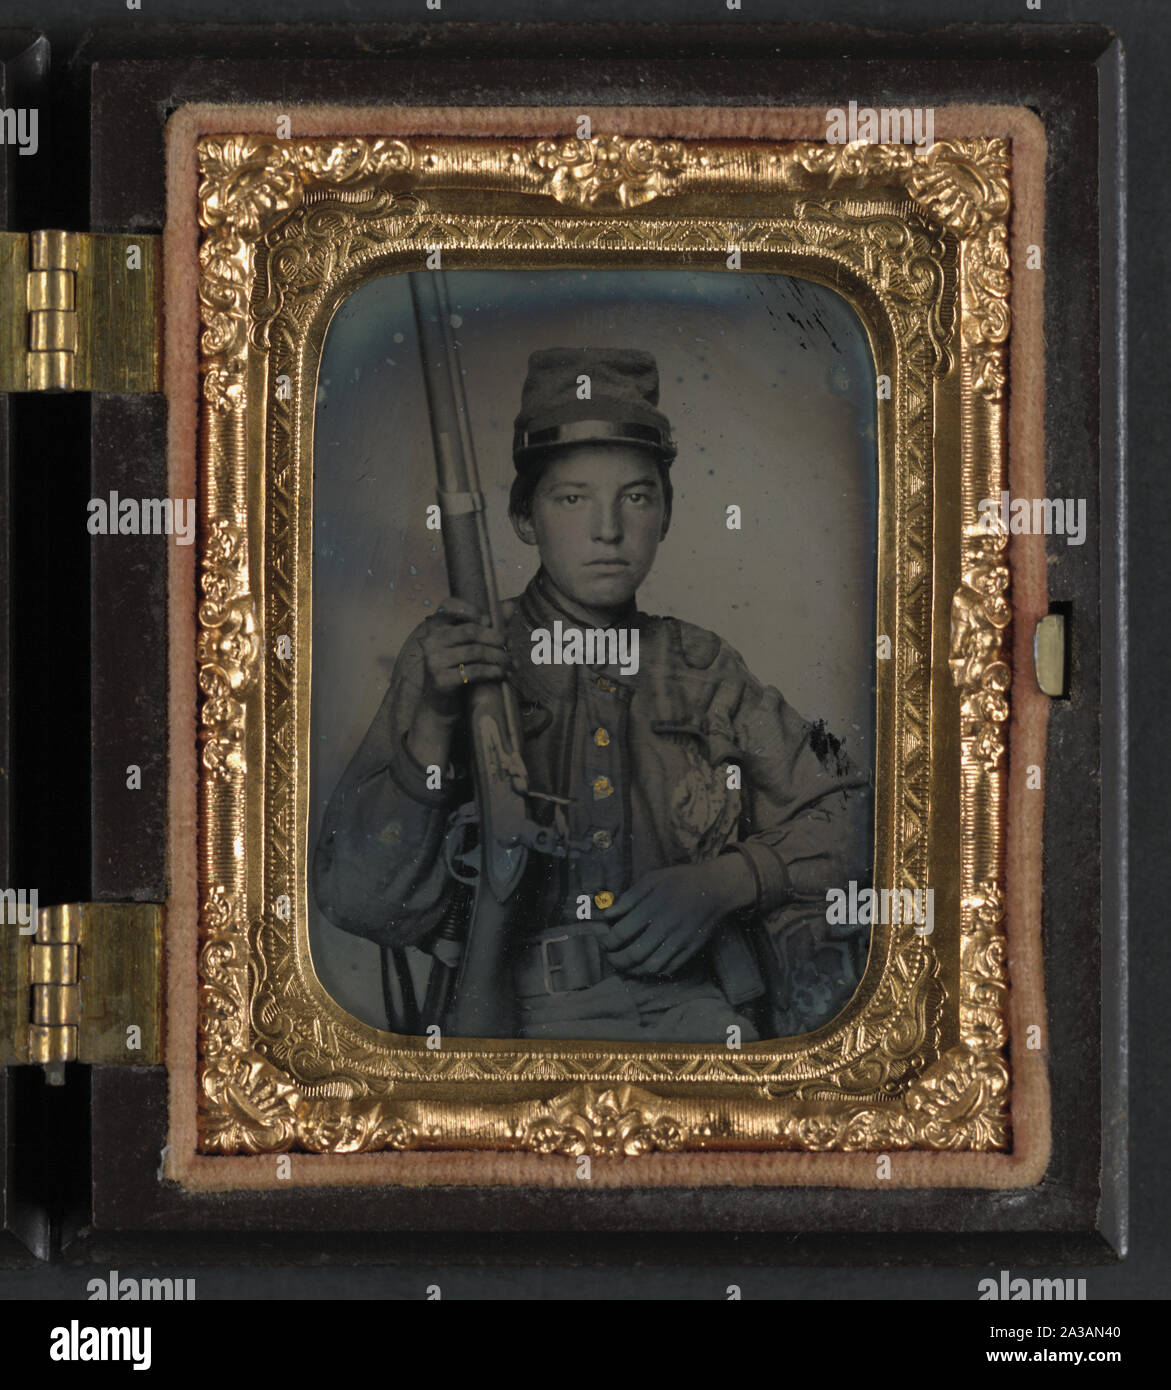 Sergeant William T. Biedler, 16 years old, of Company C, Mosby's Virginia Cavalry Regiment with flintlock musket Stock Photo